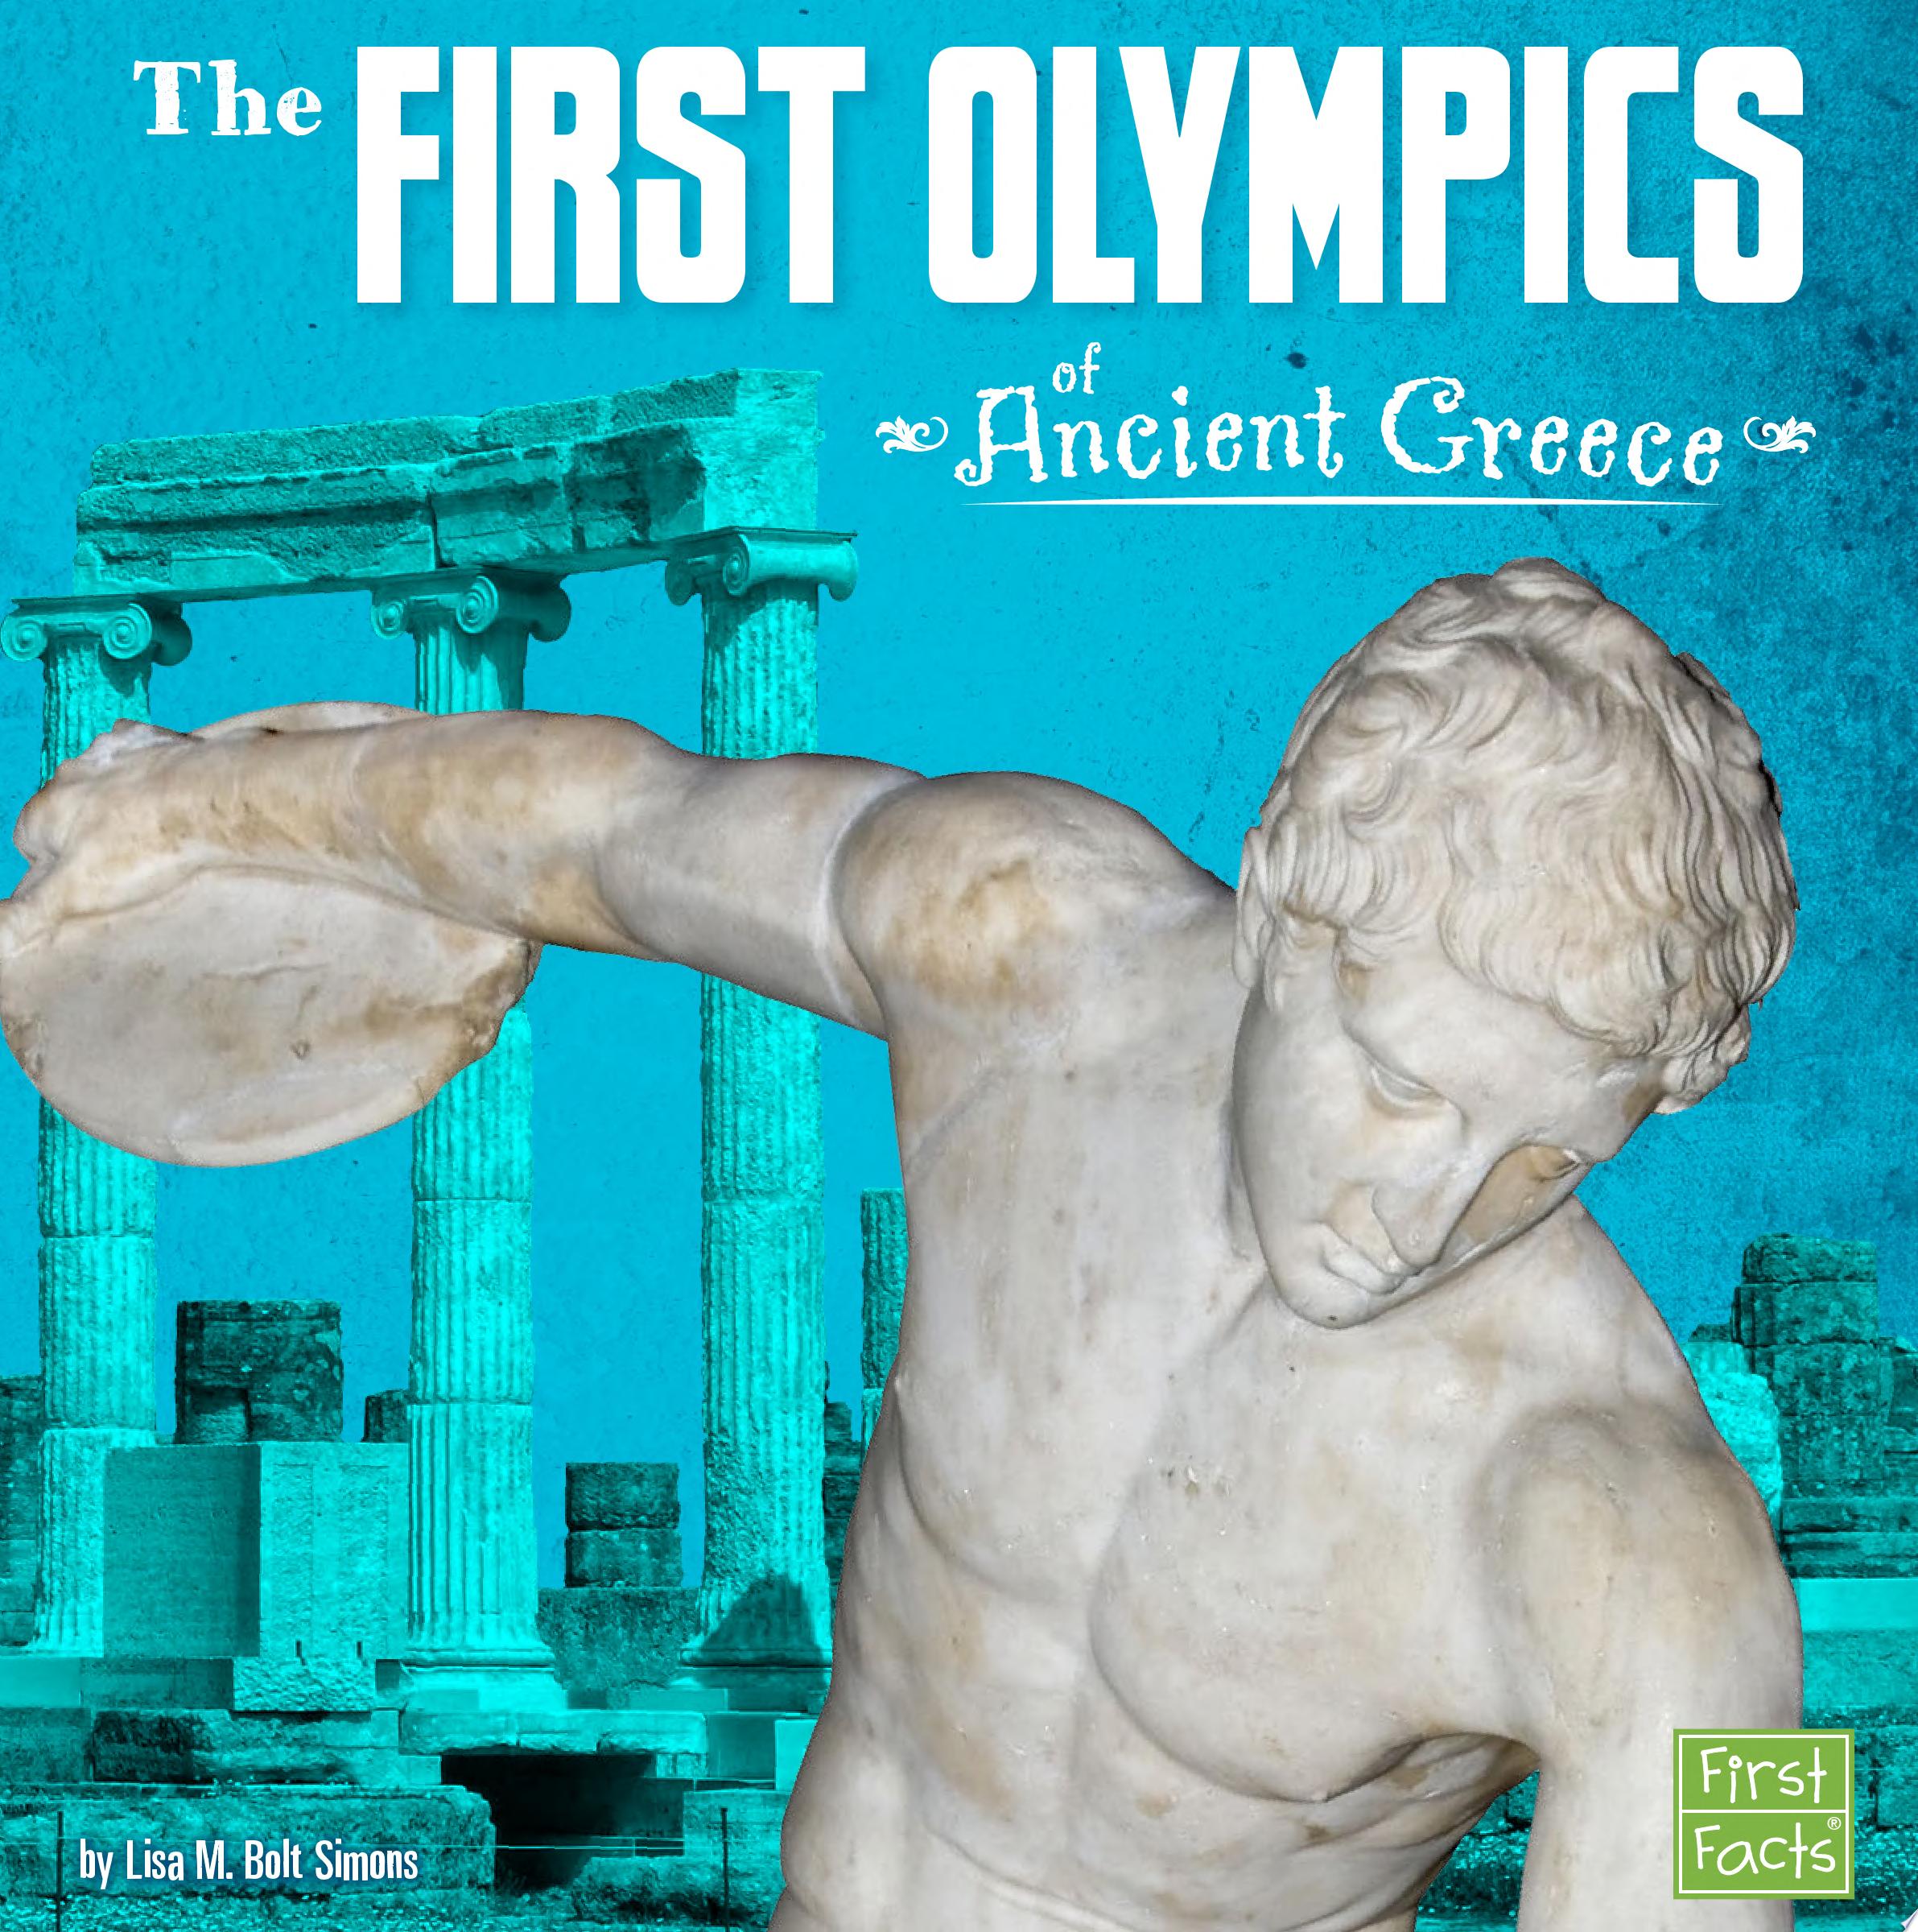 Image for "The First Olympics of Ancient Greece"